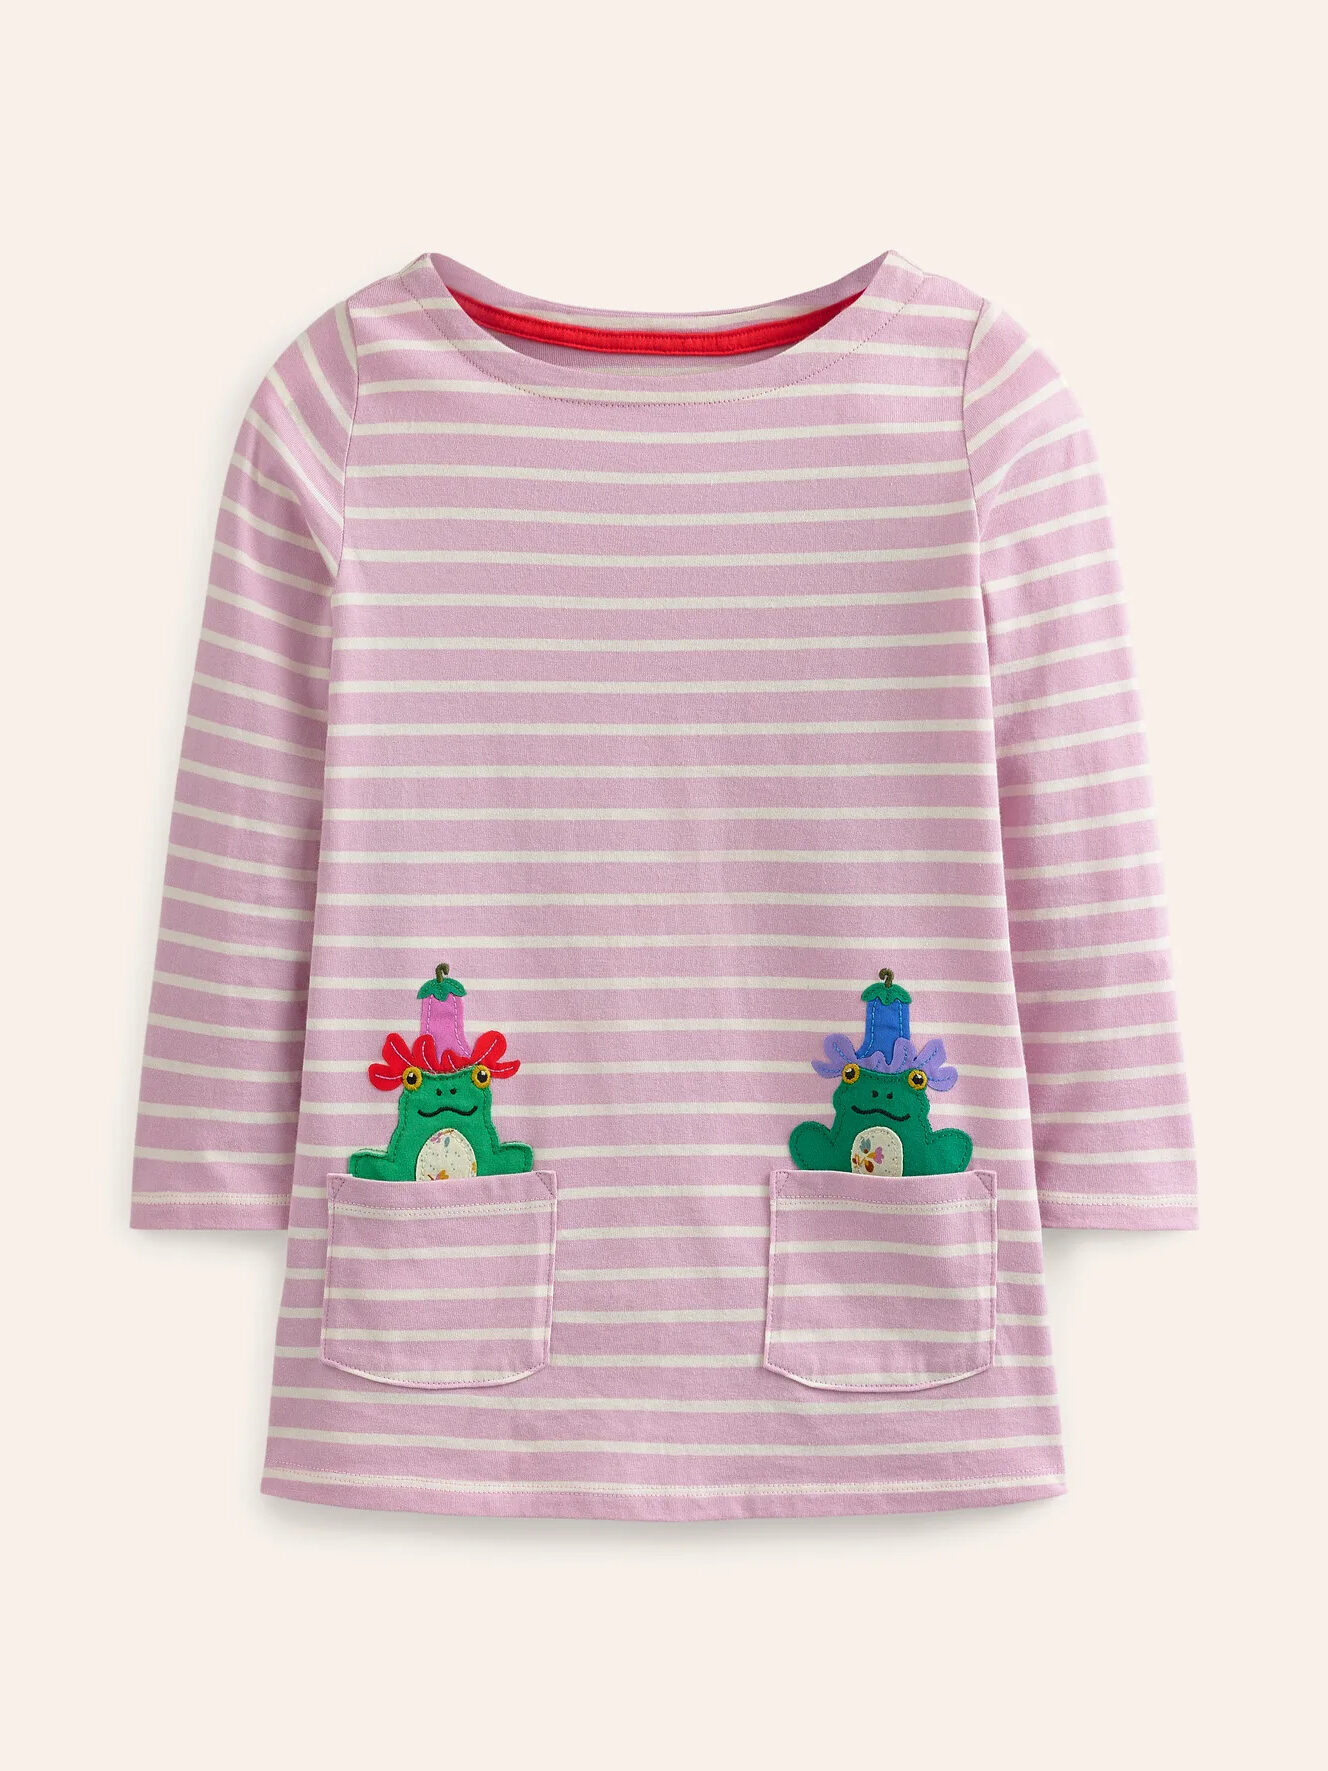 Kid's Clothes: 8 Best Organic Brands for Kids and Toddlers - Utopia